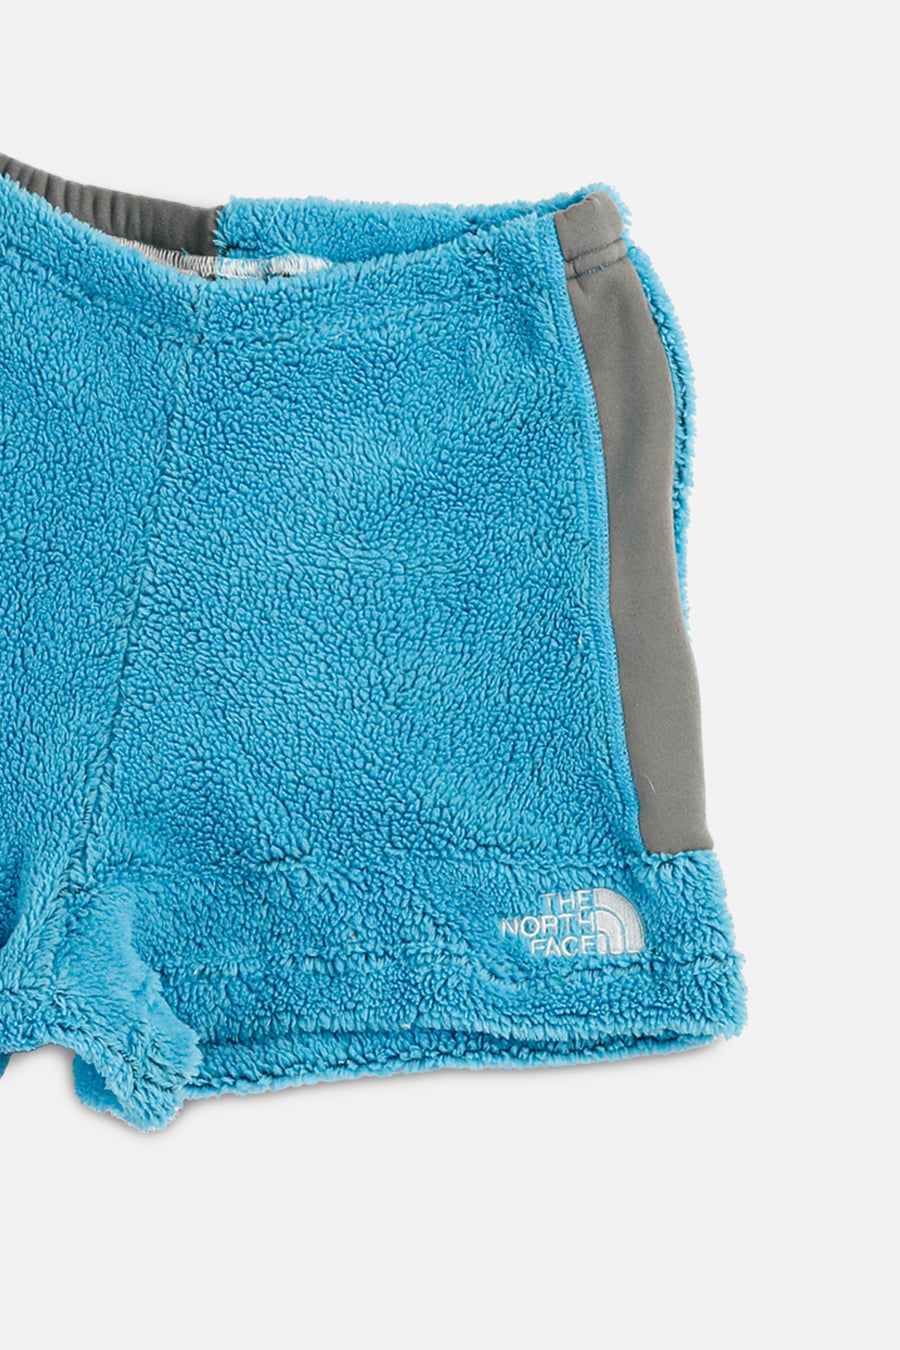 Rework North Face Fuzzy Shorts - XS